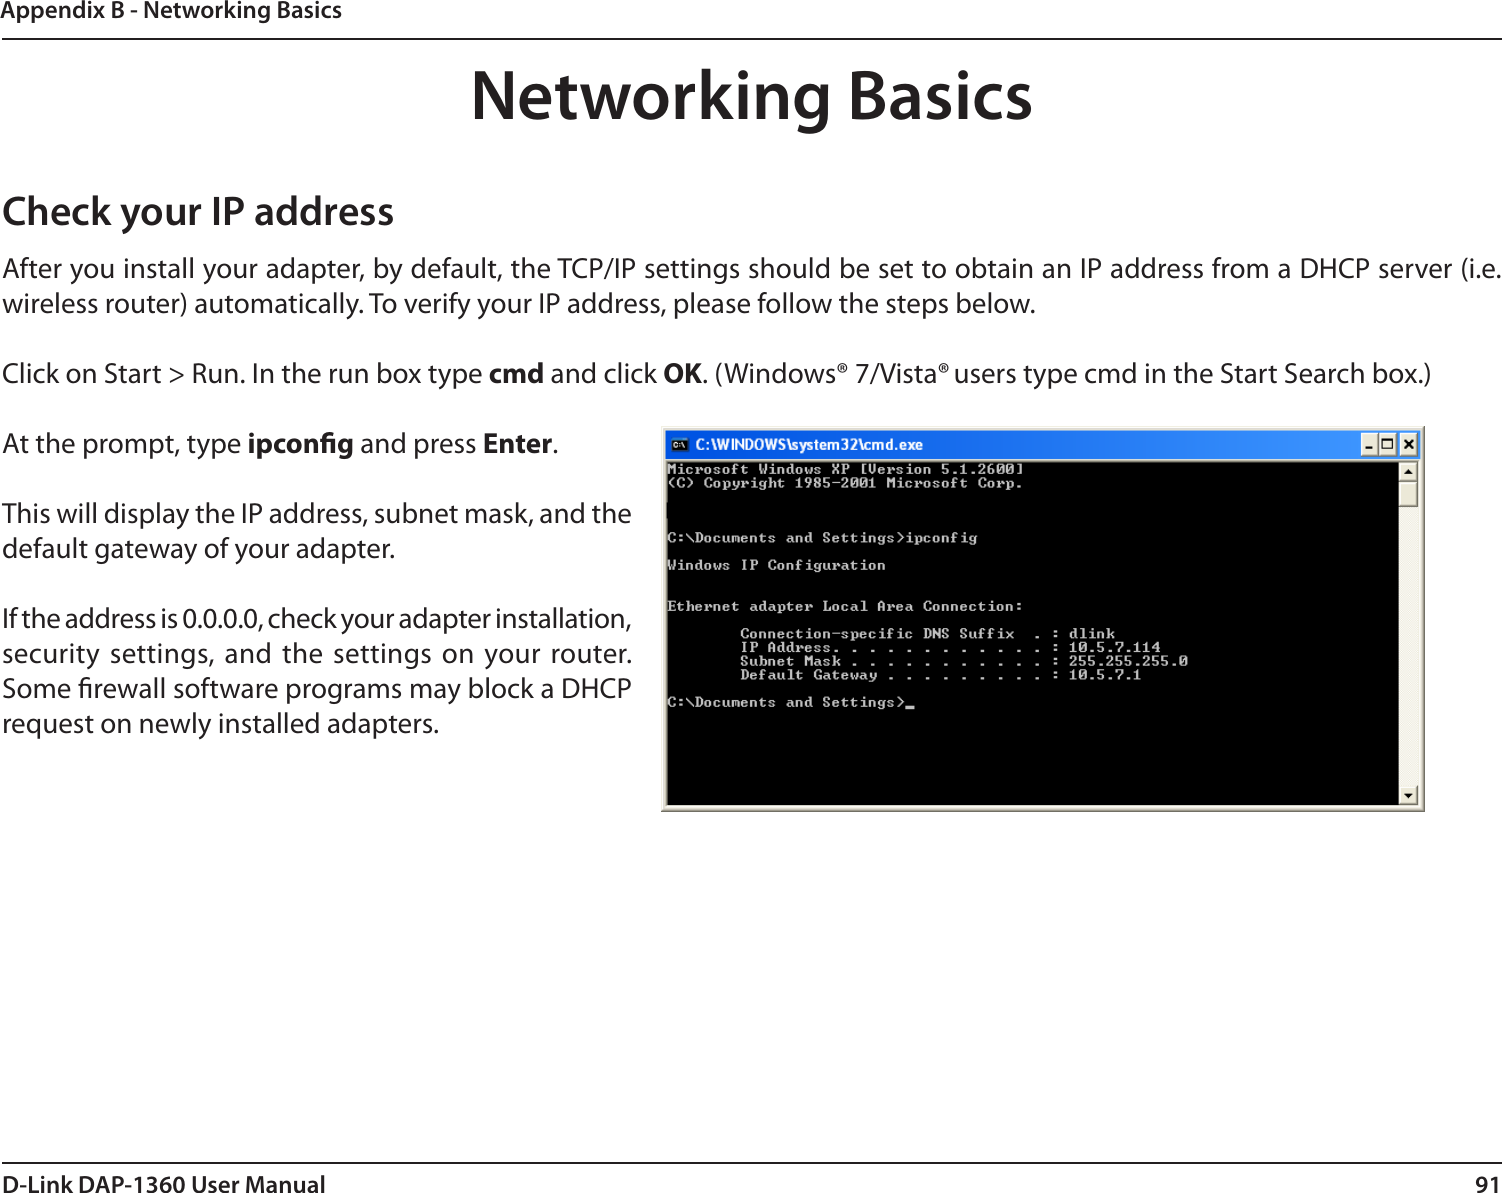 91D-Link DAP-1360 User ManualAppendix B - Networking BasicsNetworking BasicsCheck your IP addressAfter you install your adapter, by default, the TCP/IP settings should be set to obtain an IP address from a DHCP server (i.e. wireless router) automatically. To verify your IP address, please follow the steps below.Click on Start &gt; Run. In the run box type cmd and click OK. (Windows® 7/Vista® users type cmd in the Start Search box.)At the prompt, type ipcong and press Enter.This will display the IP address, subnet mask, and the default gateway of your adapter.If the address is 0.0.0.0, check your adapter installation, security  settings, and the settings on  your router. Some rewall software programs may block a DHCP request on newly installed adapters. 